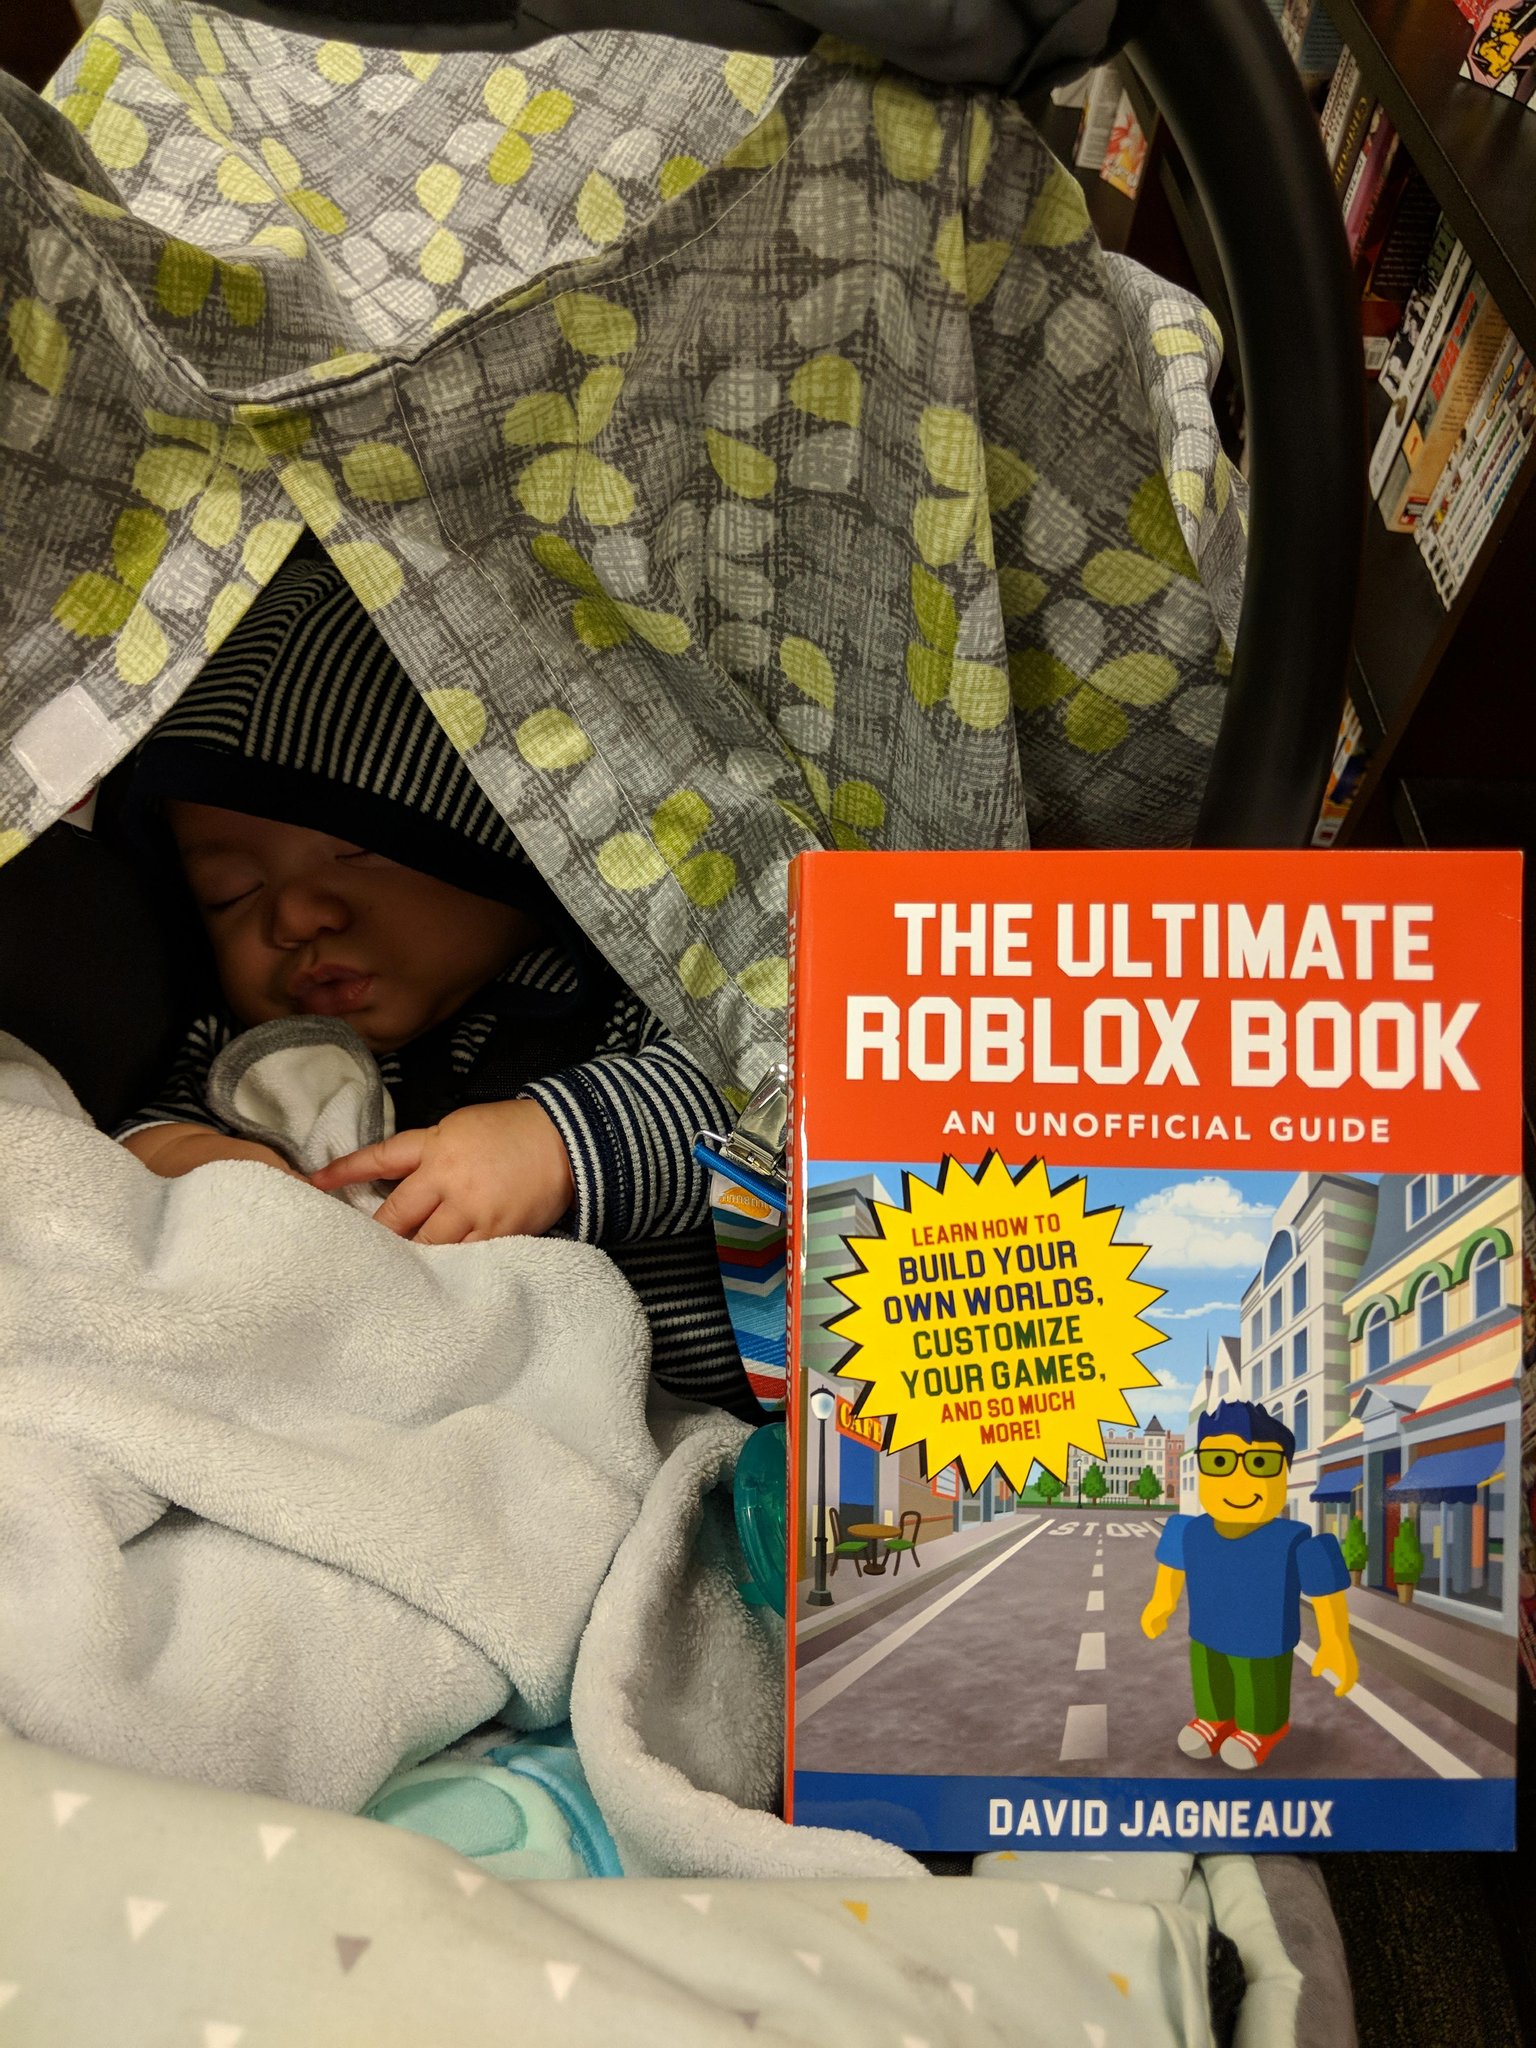 David Jagneaux Faerun On Twitter My Wife Just Walked Into A Barnes Noble And Found My Roblox Book On The Shelf This Is So Awesome And Surreal - the ultimate roblox book an unofficial guide david